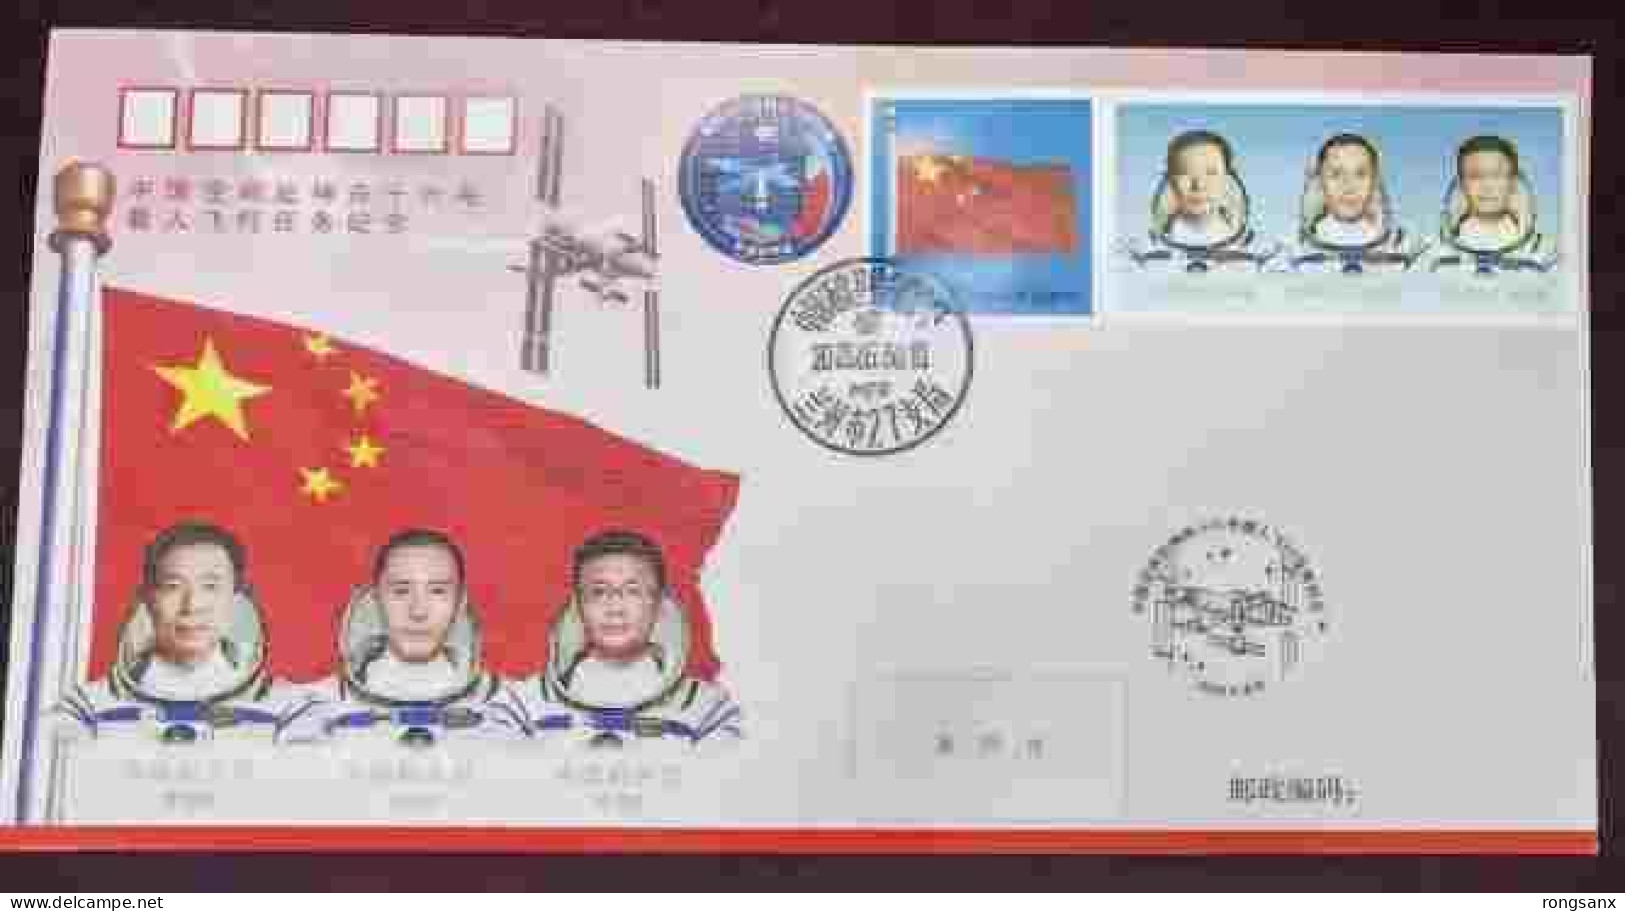 HTY-12 CHINA SHENZHOU-16 COMM.COVER 2023 SPACEMAN - Asien